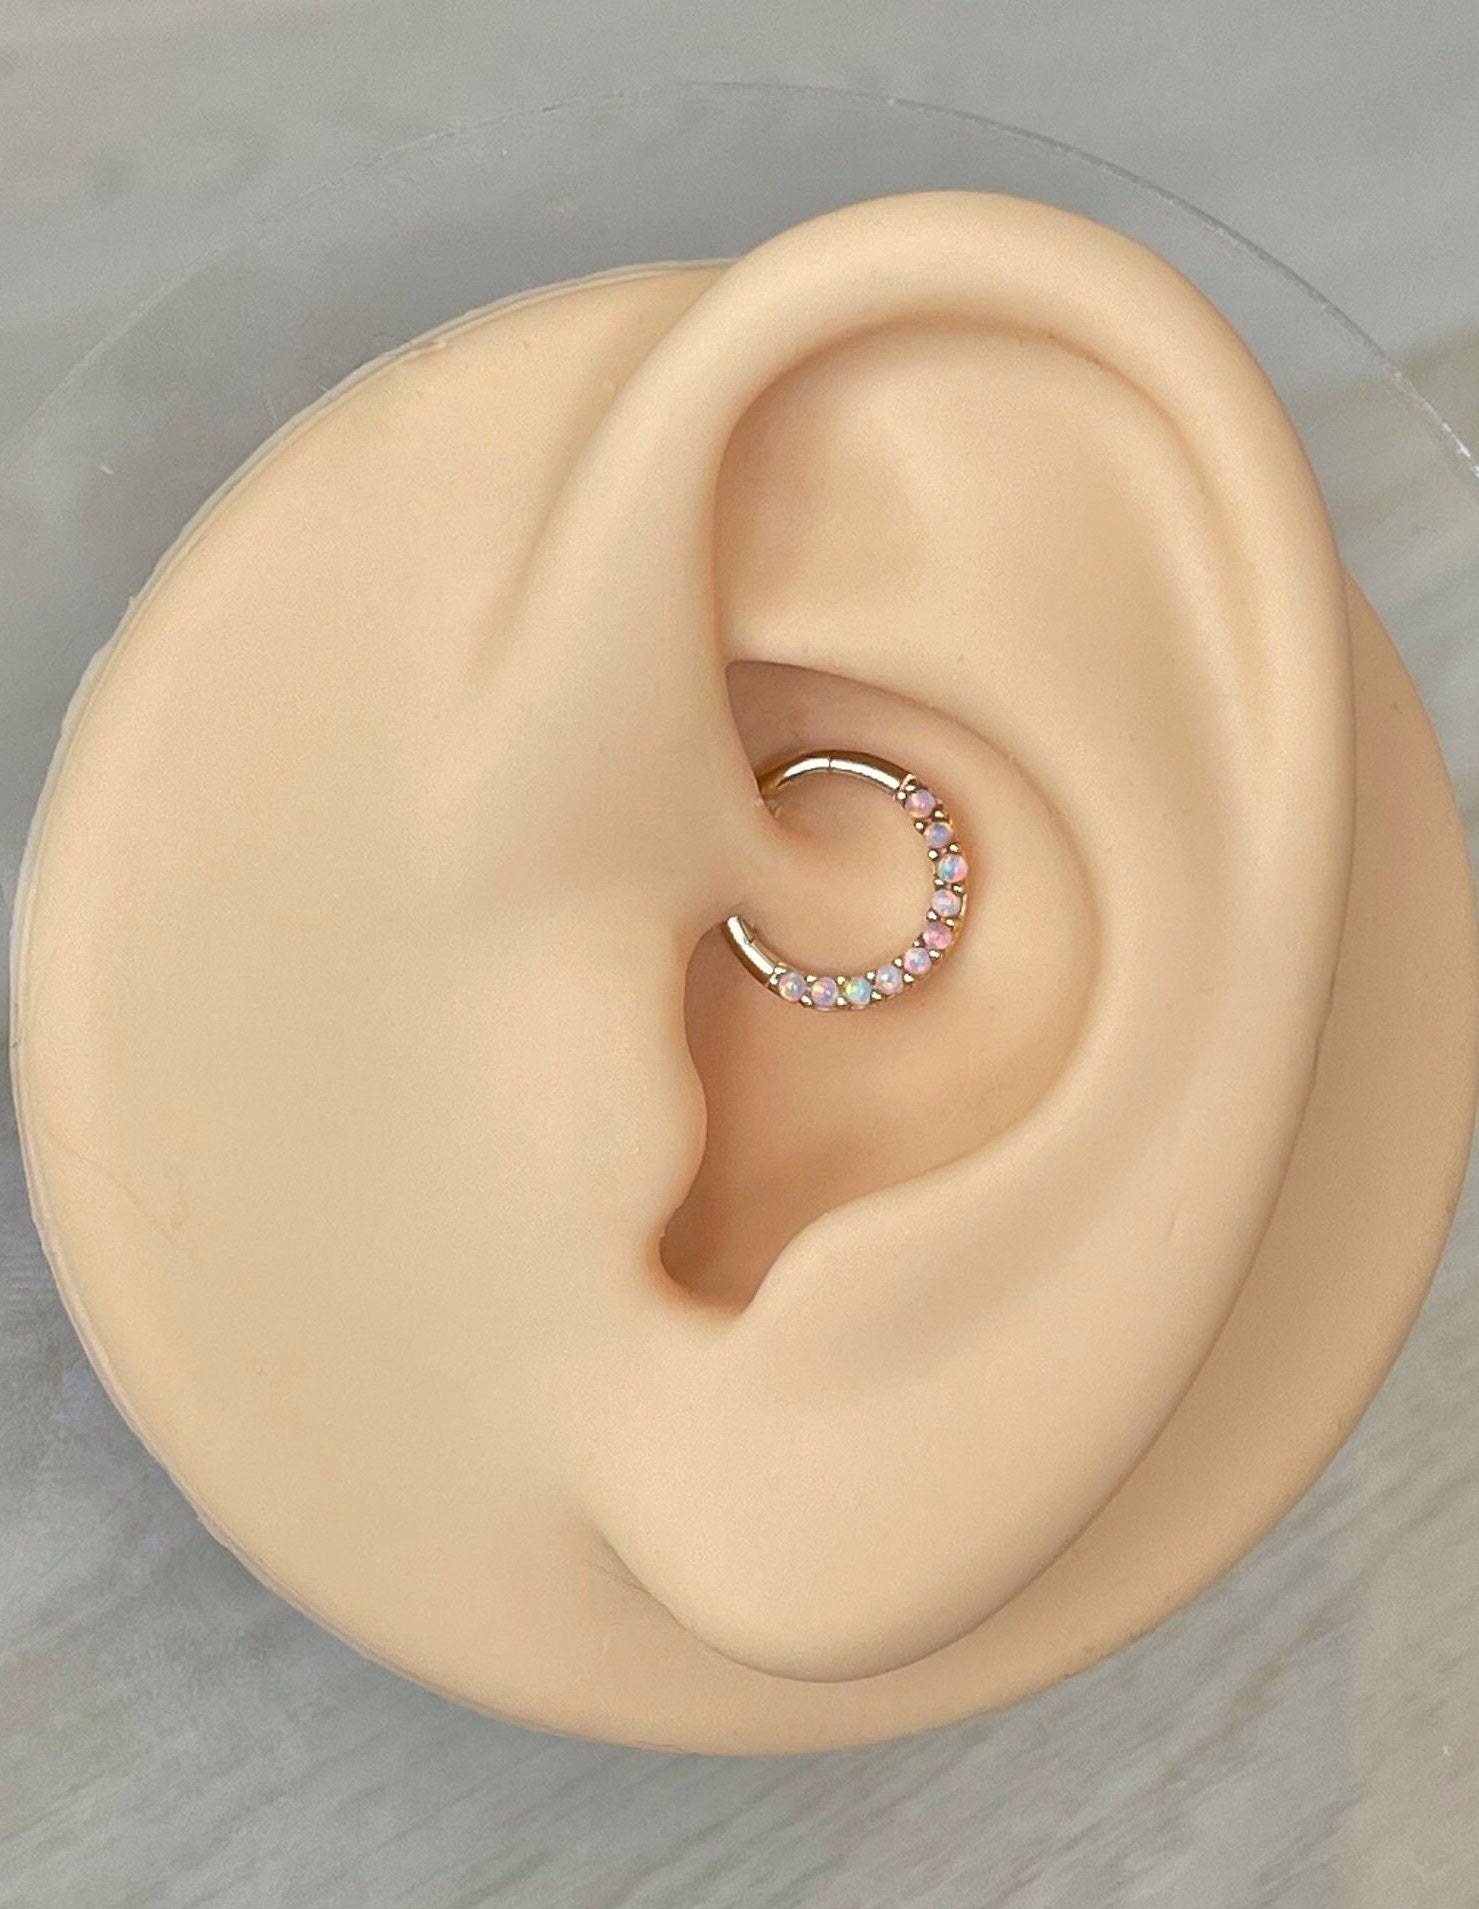 Solid Gold Opal Daith Earring (16G | 6mm, 8mm, or 10mm | 14k Solid Gold | White or Yellow Gold)